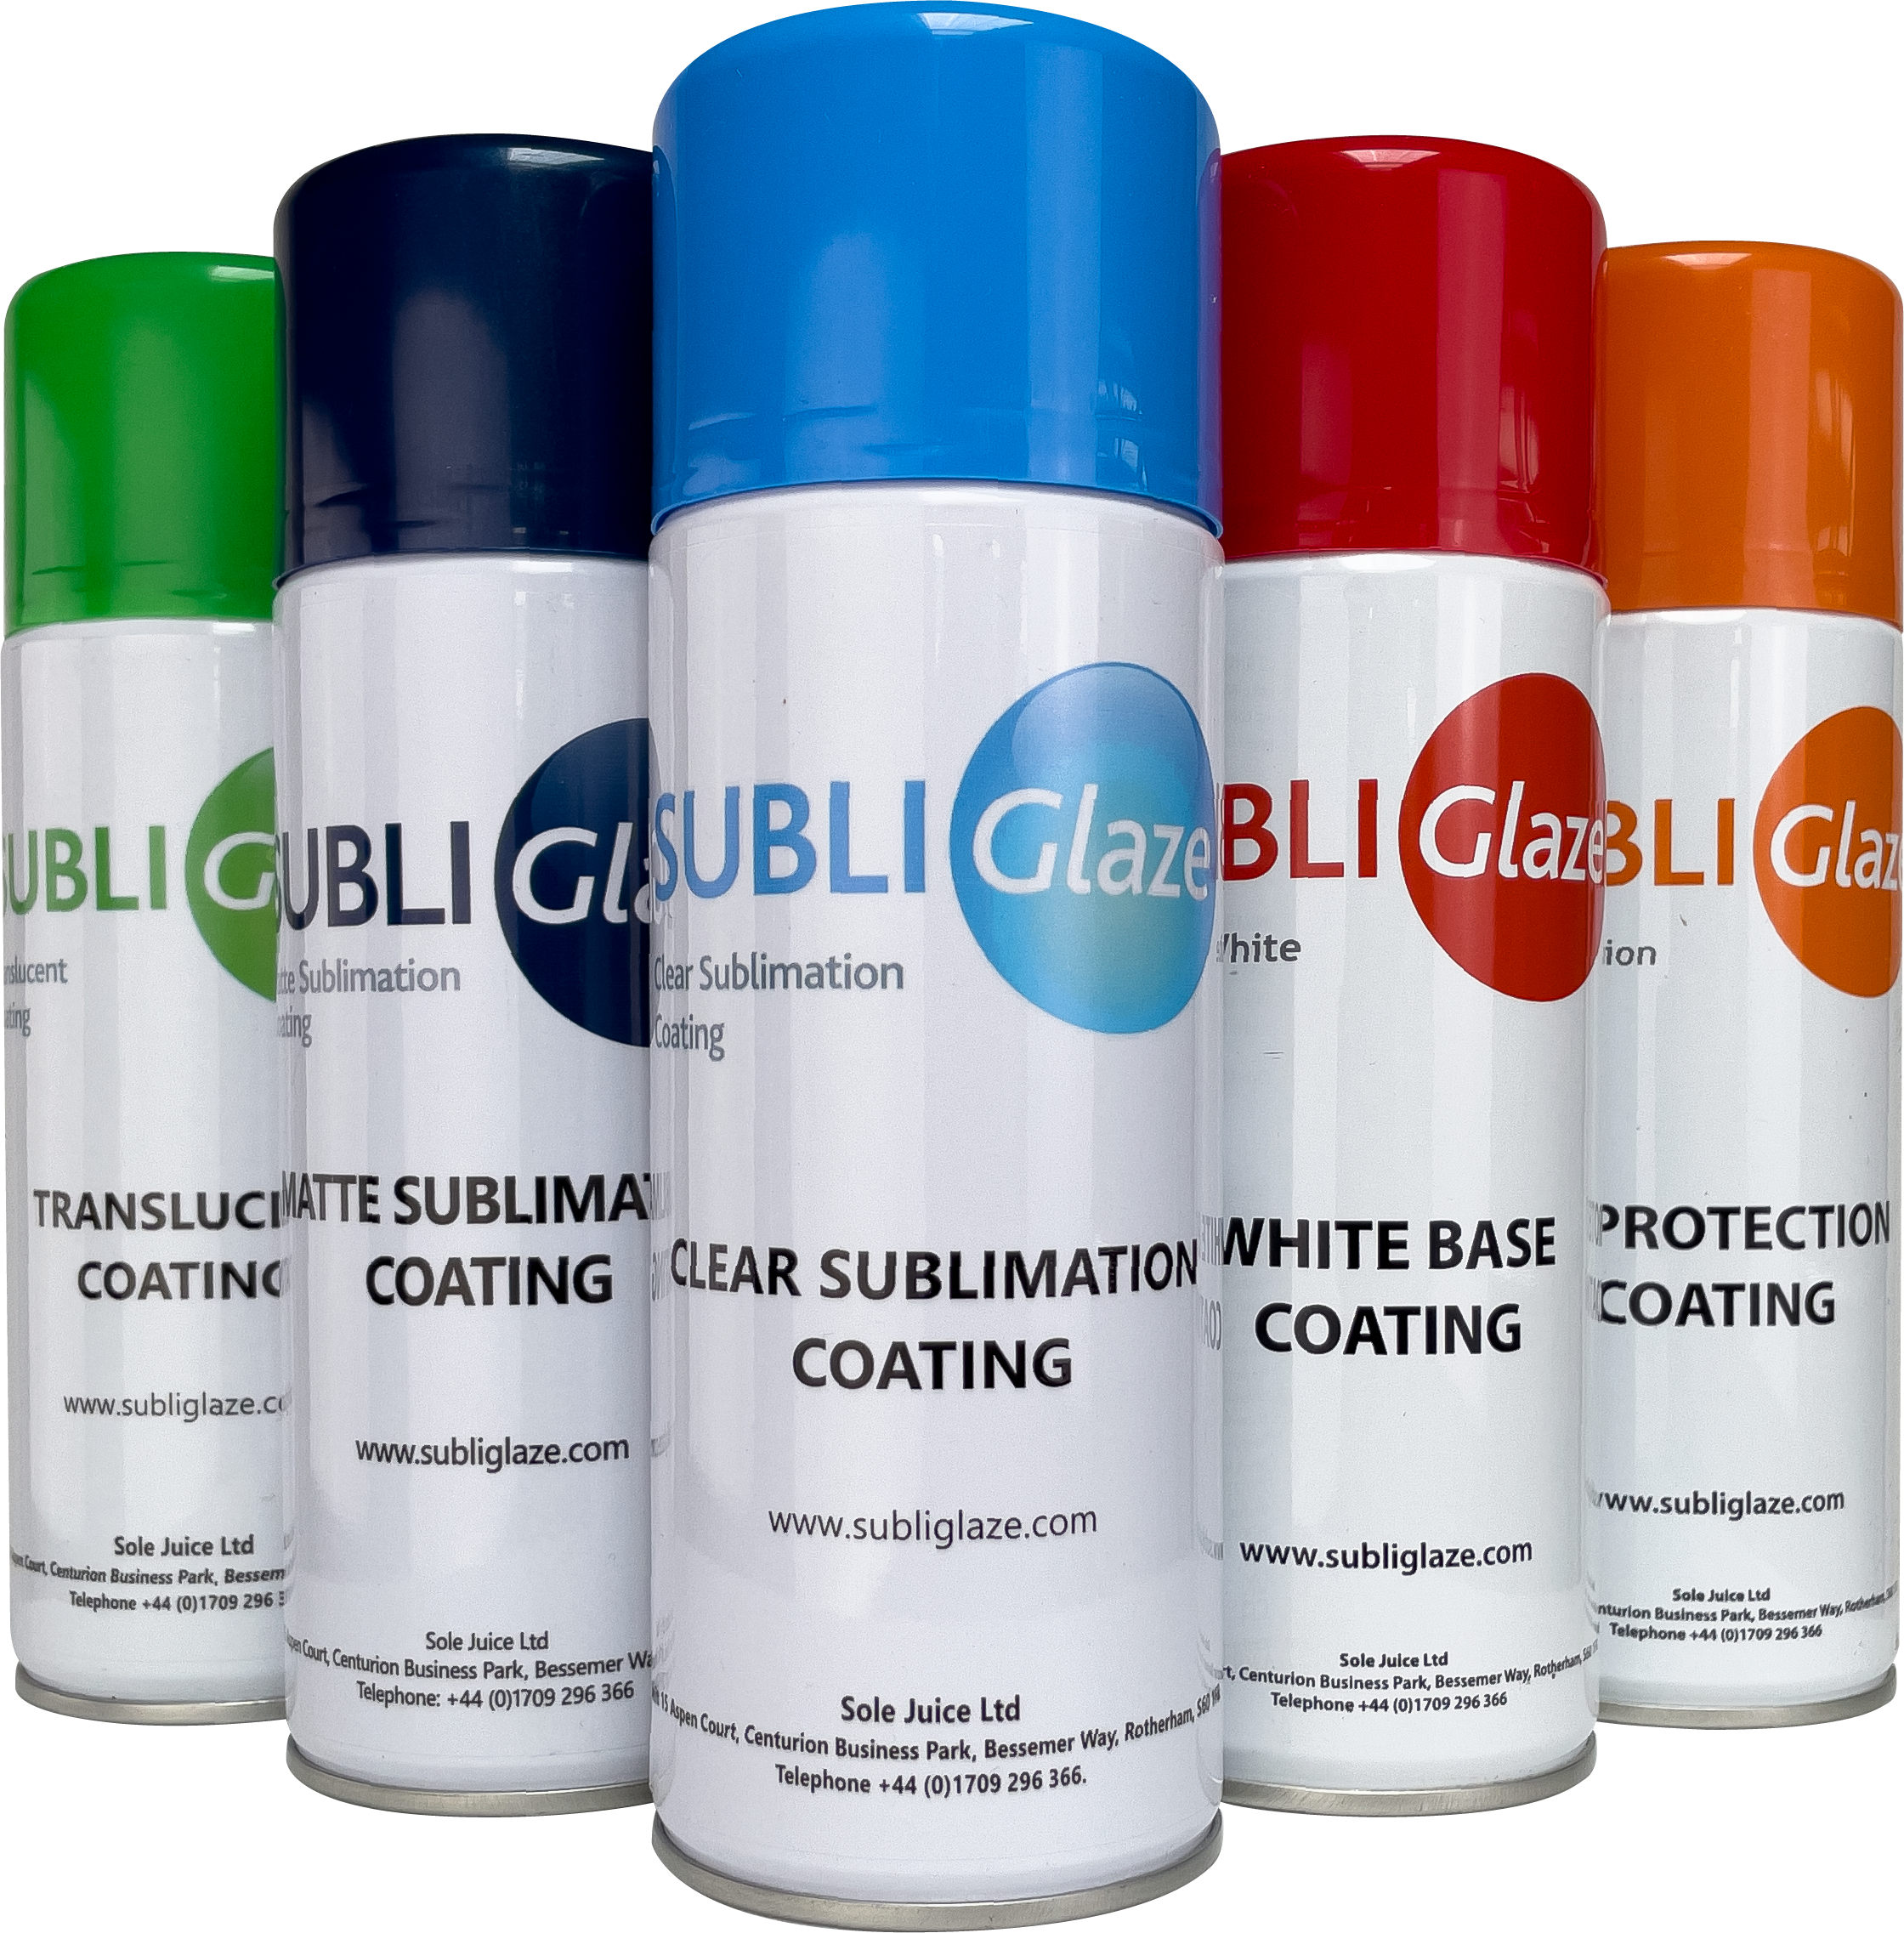 Heat Transfer Source UV Protection Coating Subli Glaze is the only  do-it-yourself sublimation coating solution designed to enable sublimation